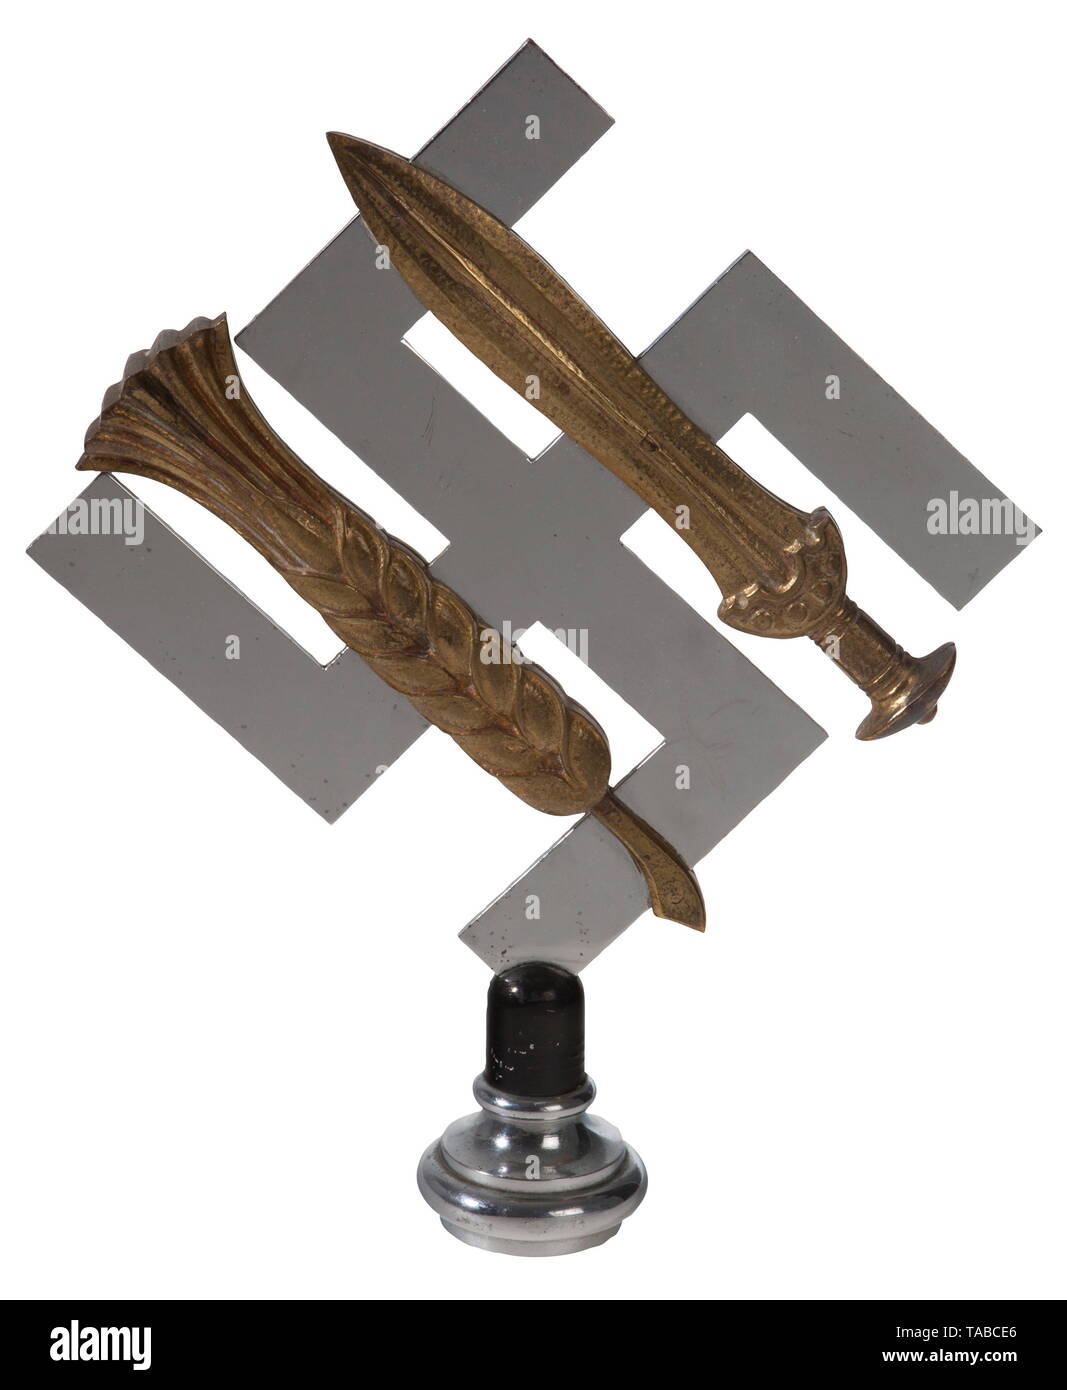 A Reichsnährstand pole top Nickel-plated swastika superimposed with gilded Germanic tribe sword and wheat sheaf. Edge of swastika's lower arm stamped, 'Ges. Gesch.', 'Priessen Rauer & Co München'. Without pole cup. Height 26 cm. USA-lot, see page 4. historic, historical, organisations, organizations, organization, organisation 20th century, Additional-Rights-Clearance-Info-Not-Available Stock Photo